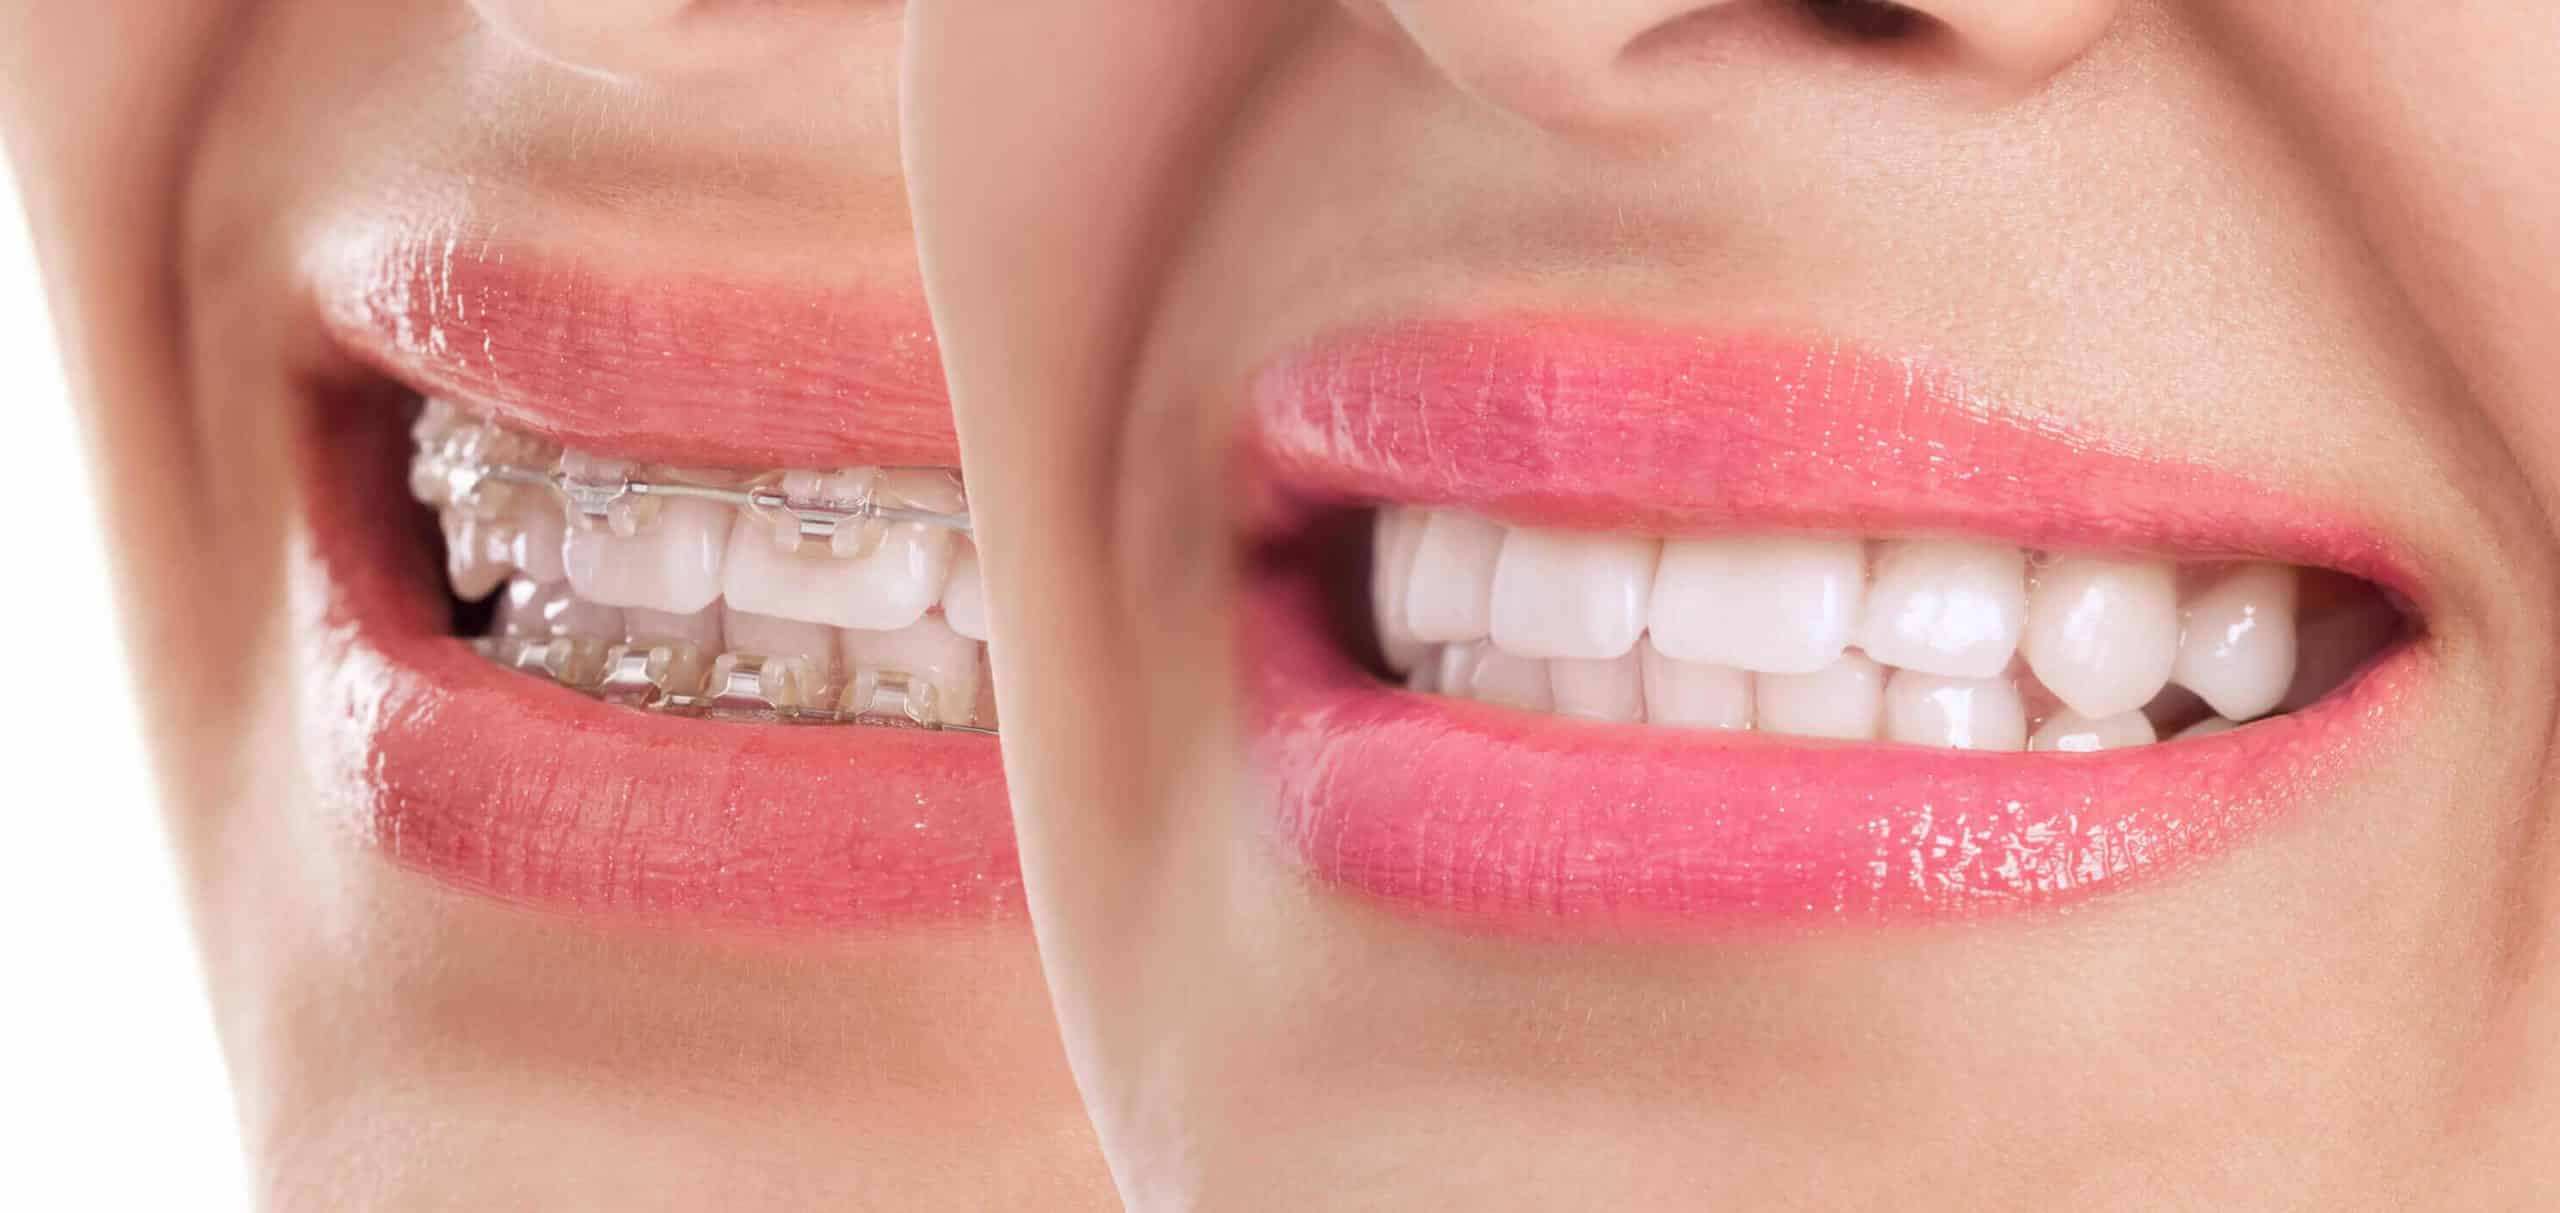 Can You Get Rid Of A Lisp With Braces How To Avoid Braces Common Habits That Lead To Braces